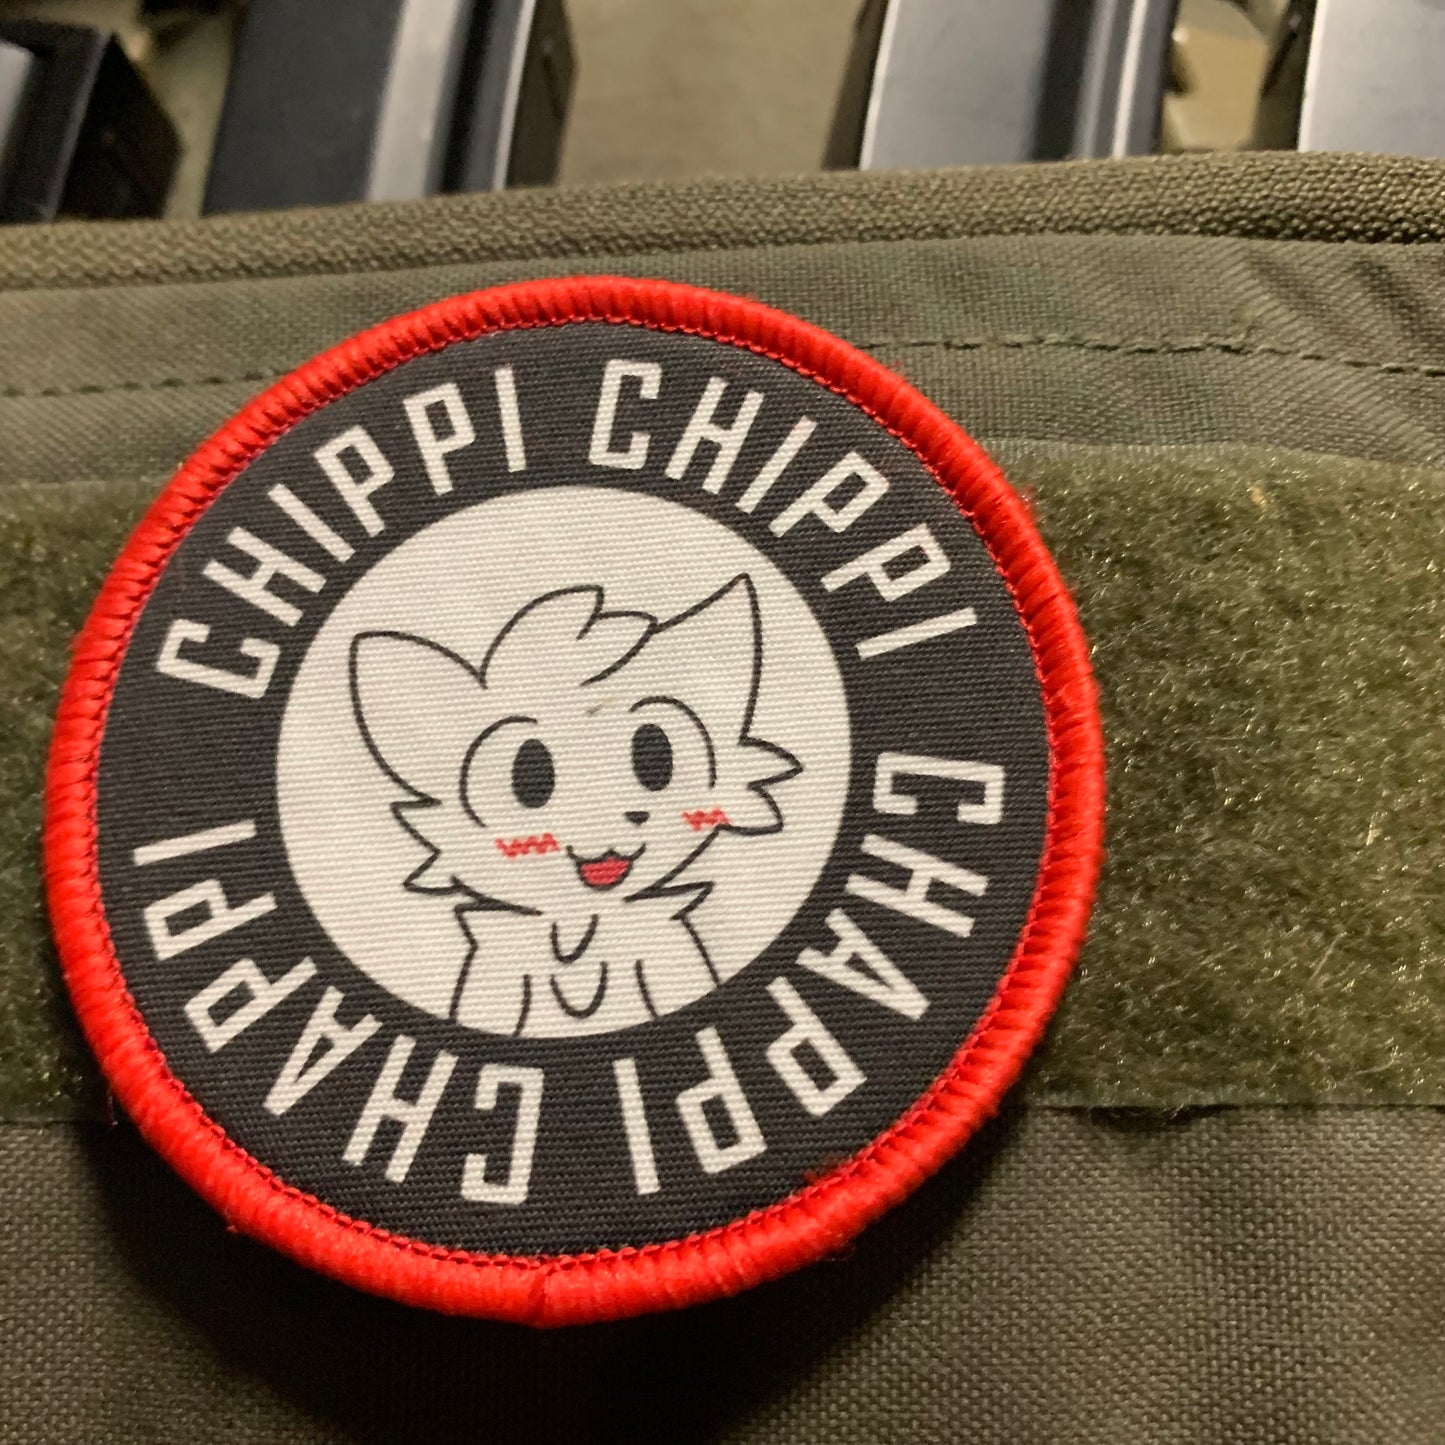 Boykisser Chipi Chipi Silly Cat Airsoft Meme Patch or Sticker